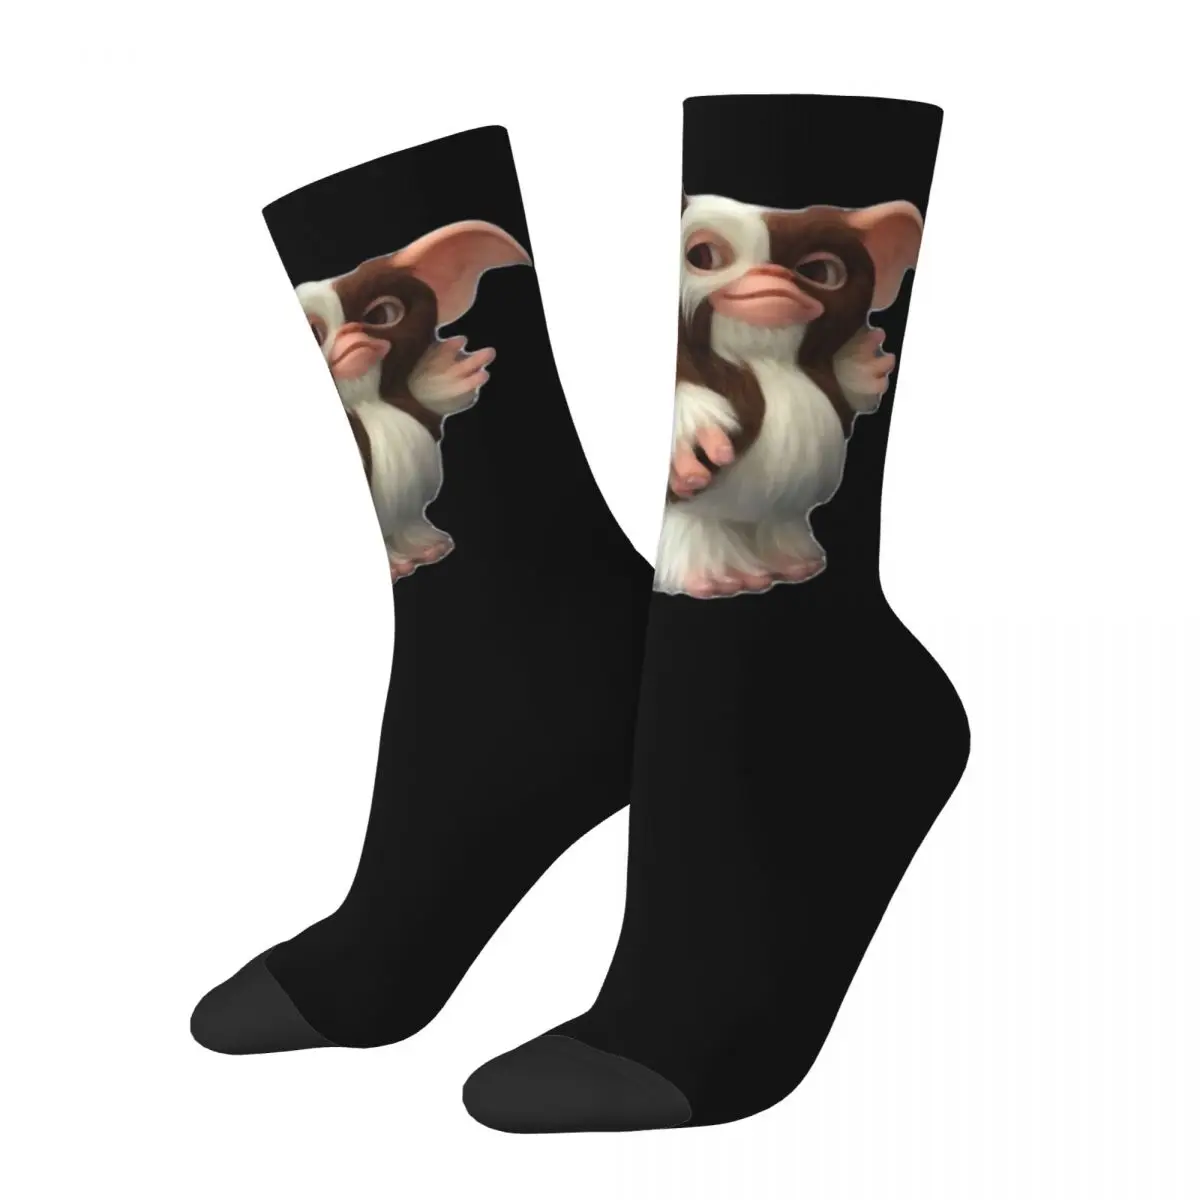 Gremlins Gizmo Mogwai cosy Unisex Socks Running Interesting Four Seasons Socks ,Search 'Gizmo' more in store steve mccurry in search of elsewhere